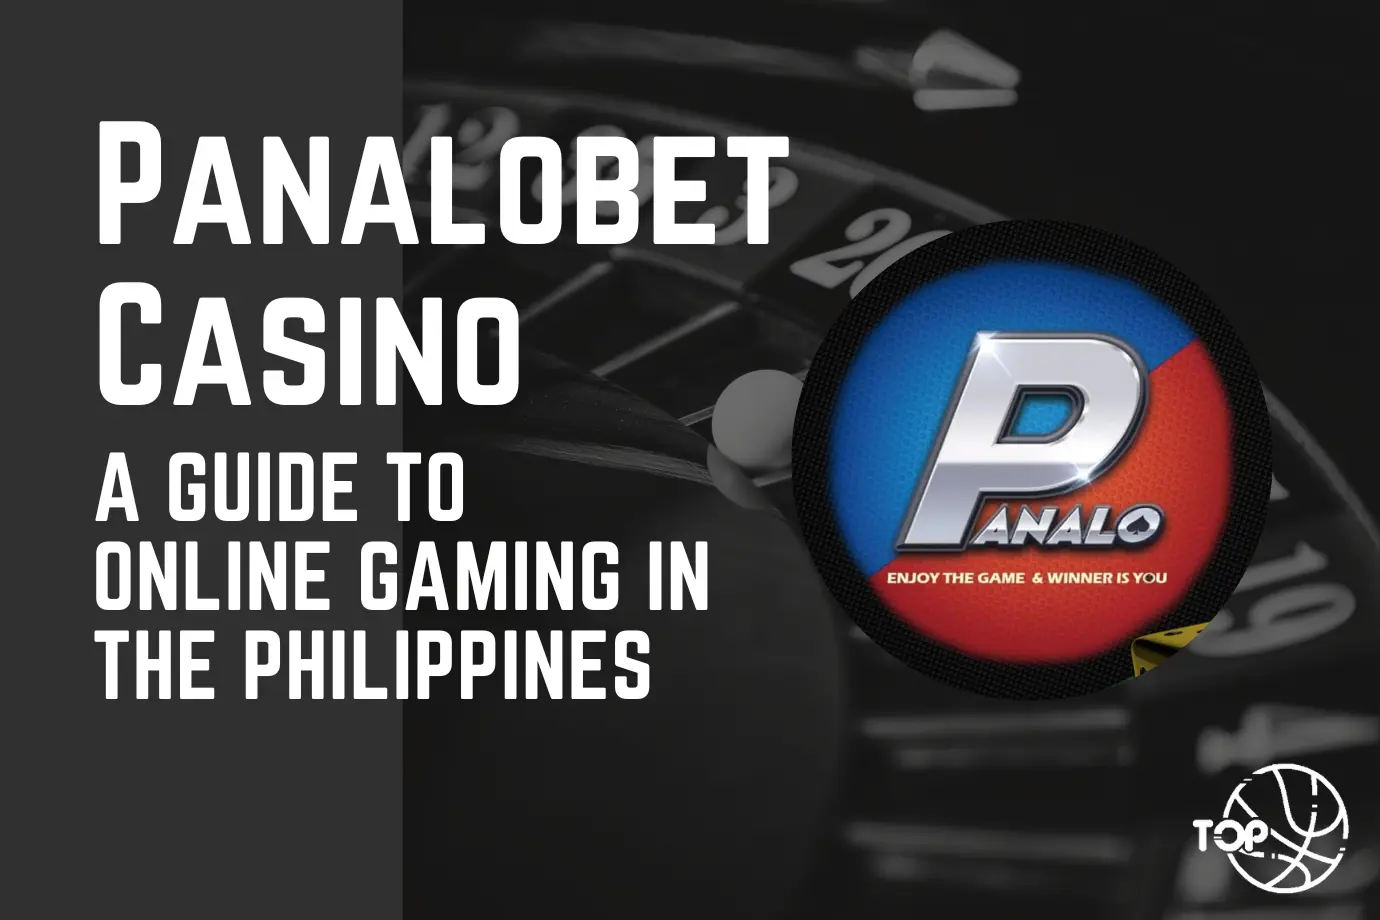 Panalobet Casino: A Guide to Online Gaming in the Philippines